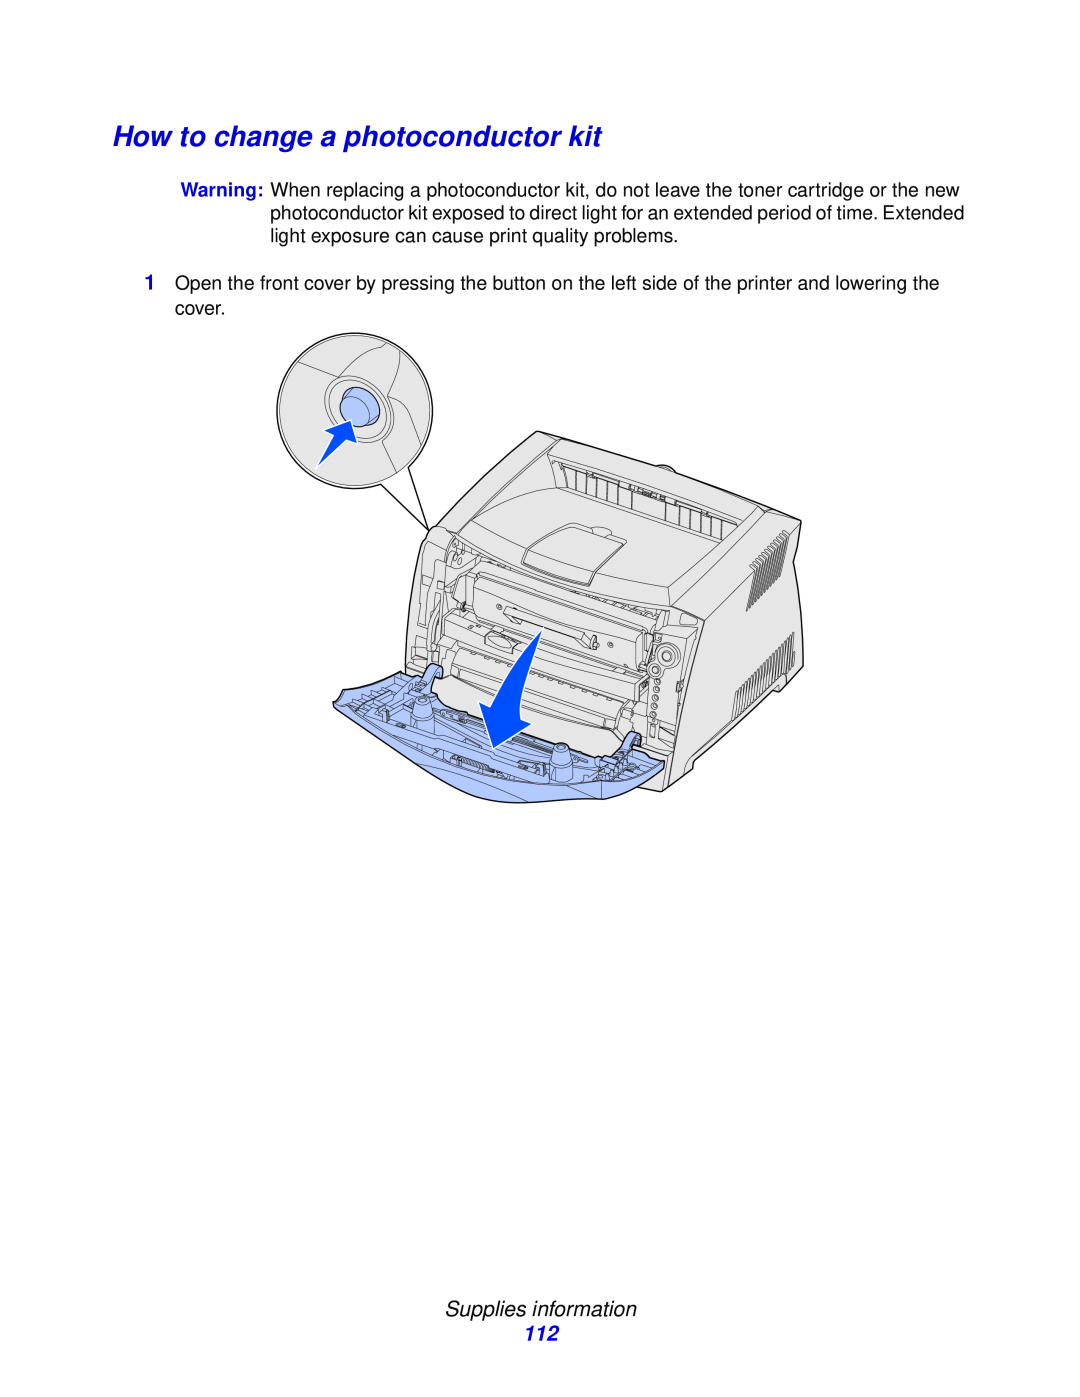 Lexmark E332n, 232, 230 manual How to change a photoconductor kit, Supplies information 